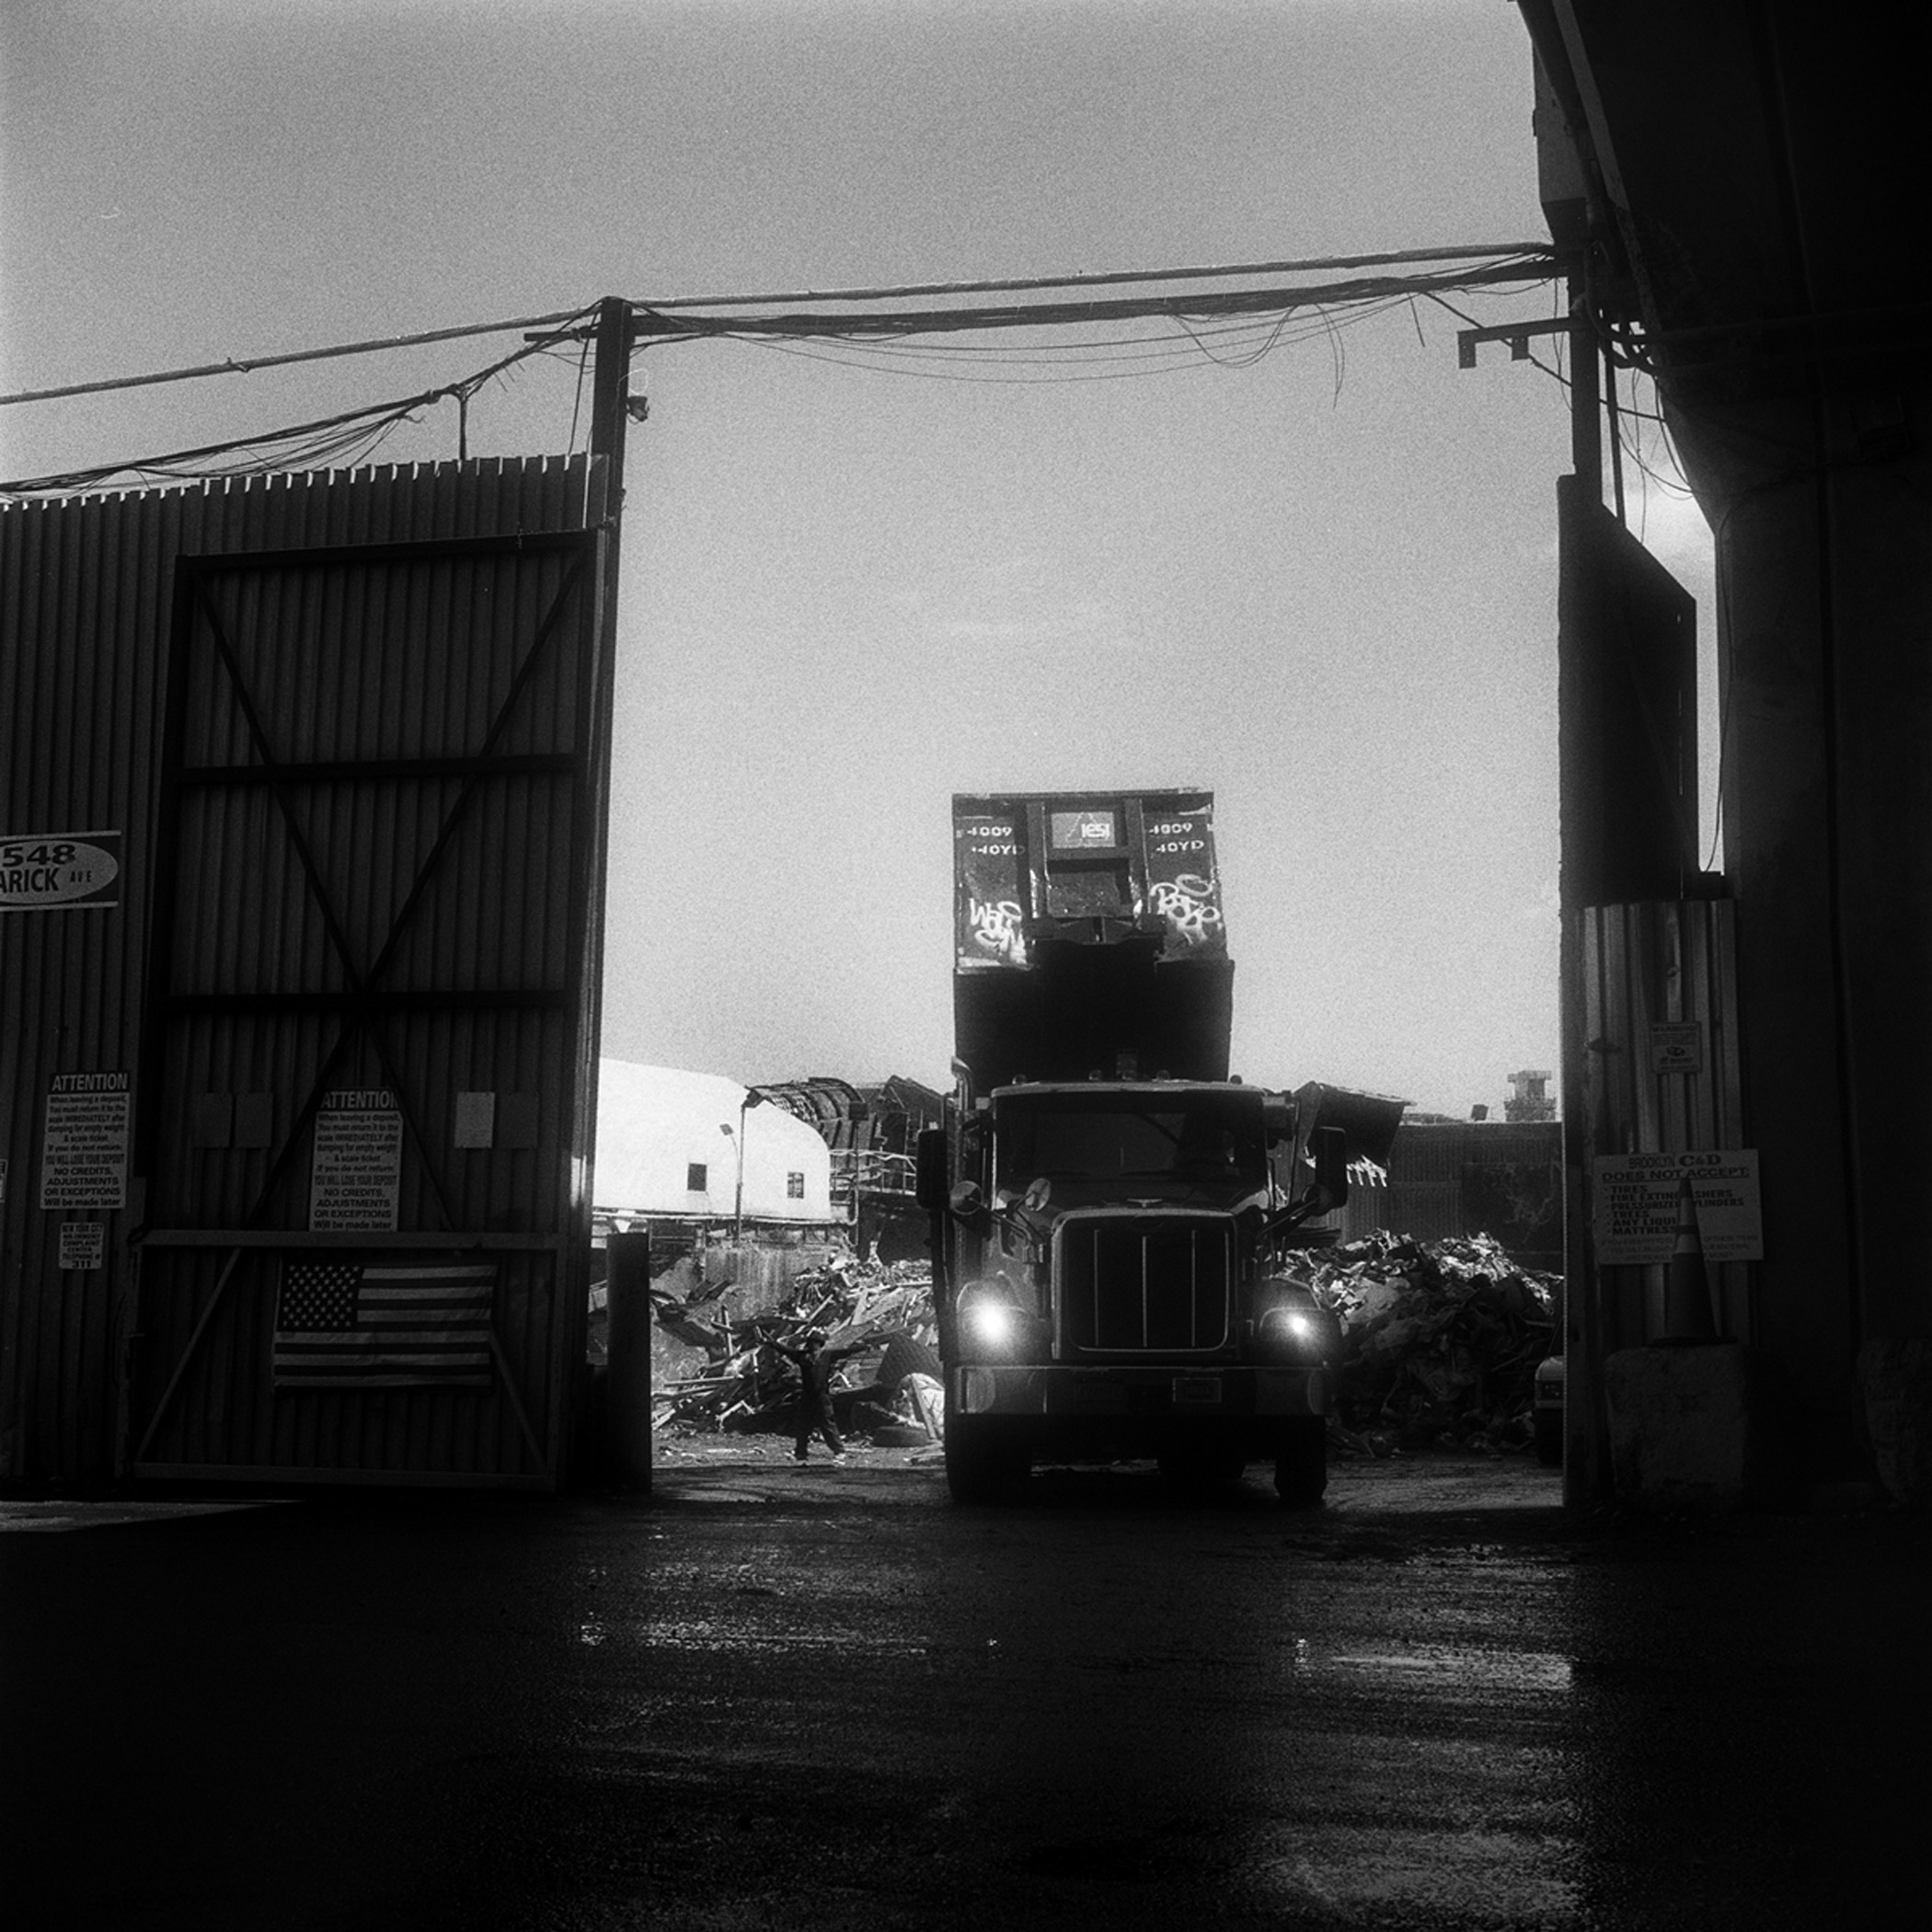 A roll-off truck with its container in the dumping position, as the yard spotter signals to the driver that his container is empty in Greenpoint, Brooklyn, N.Y., September 2015.